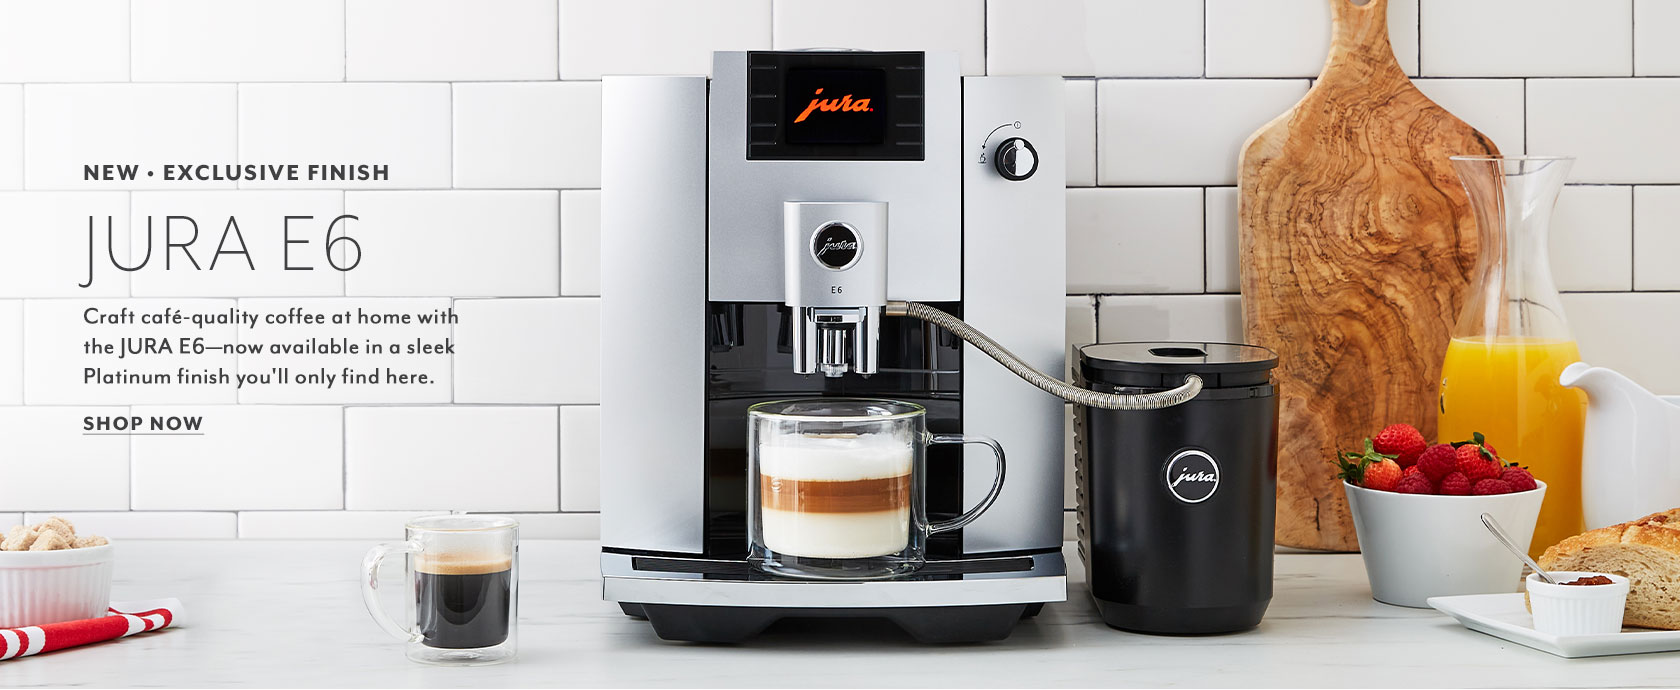 New exclusive finish Jura E6. Craft cafe-quality coffee at home with the Jura E6 now available in a sleek Platinum finish you'll only find here. Shop Now.